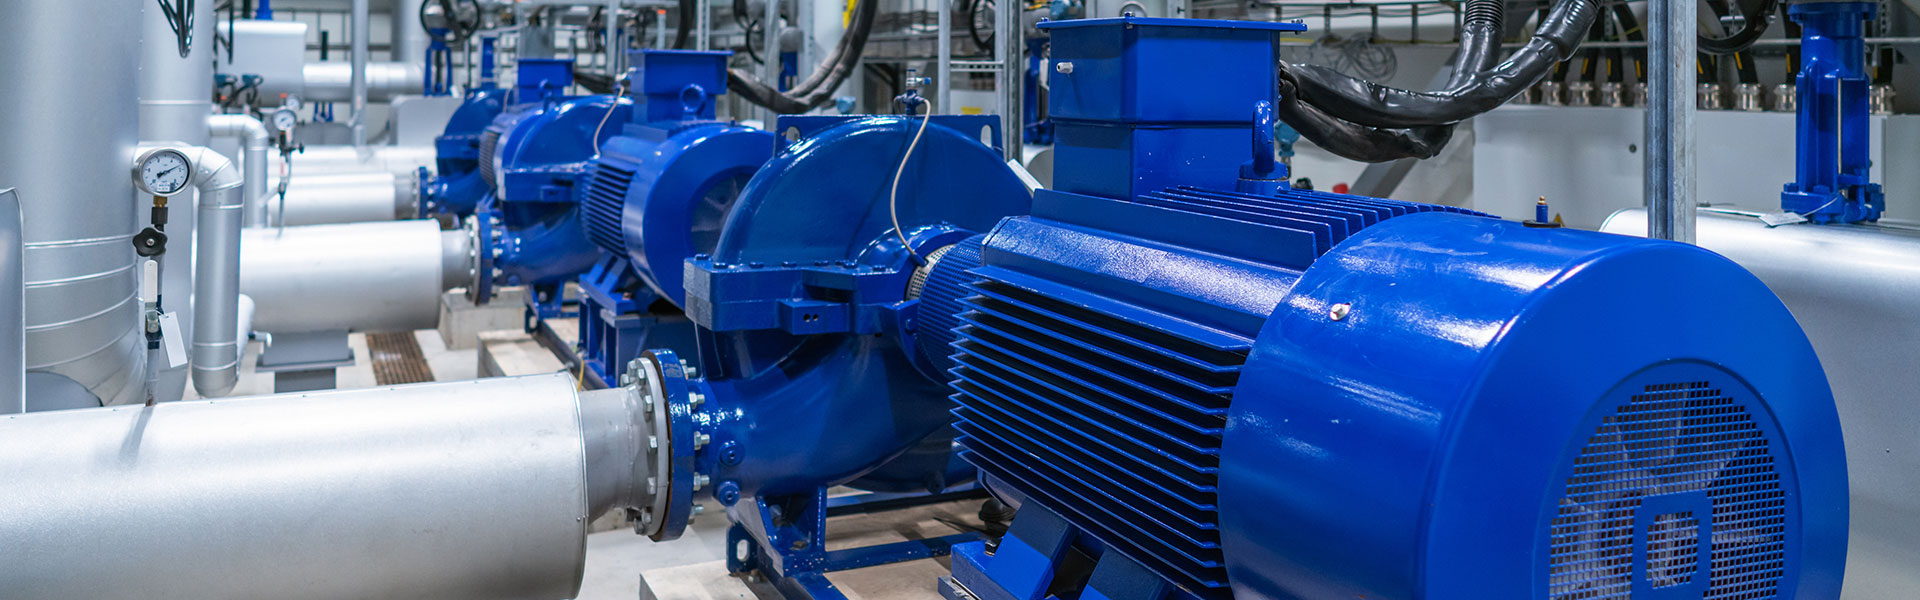 pump engineering solutions for business